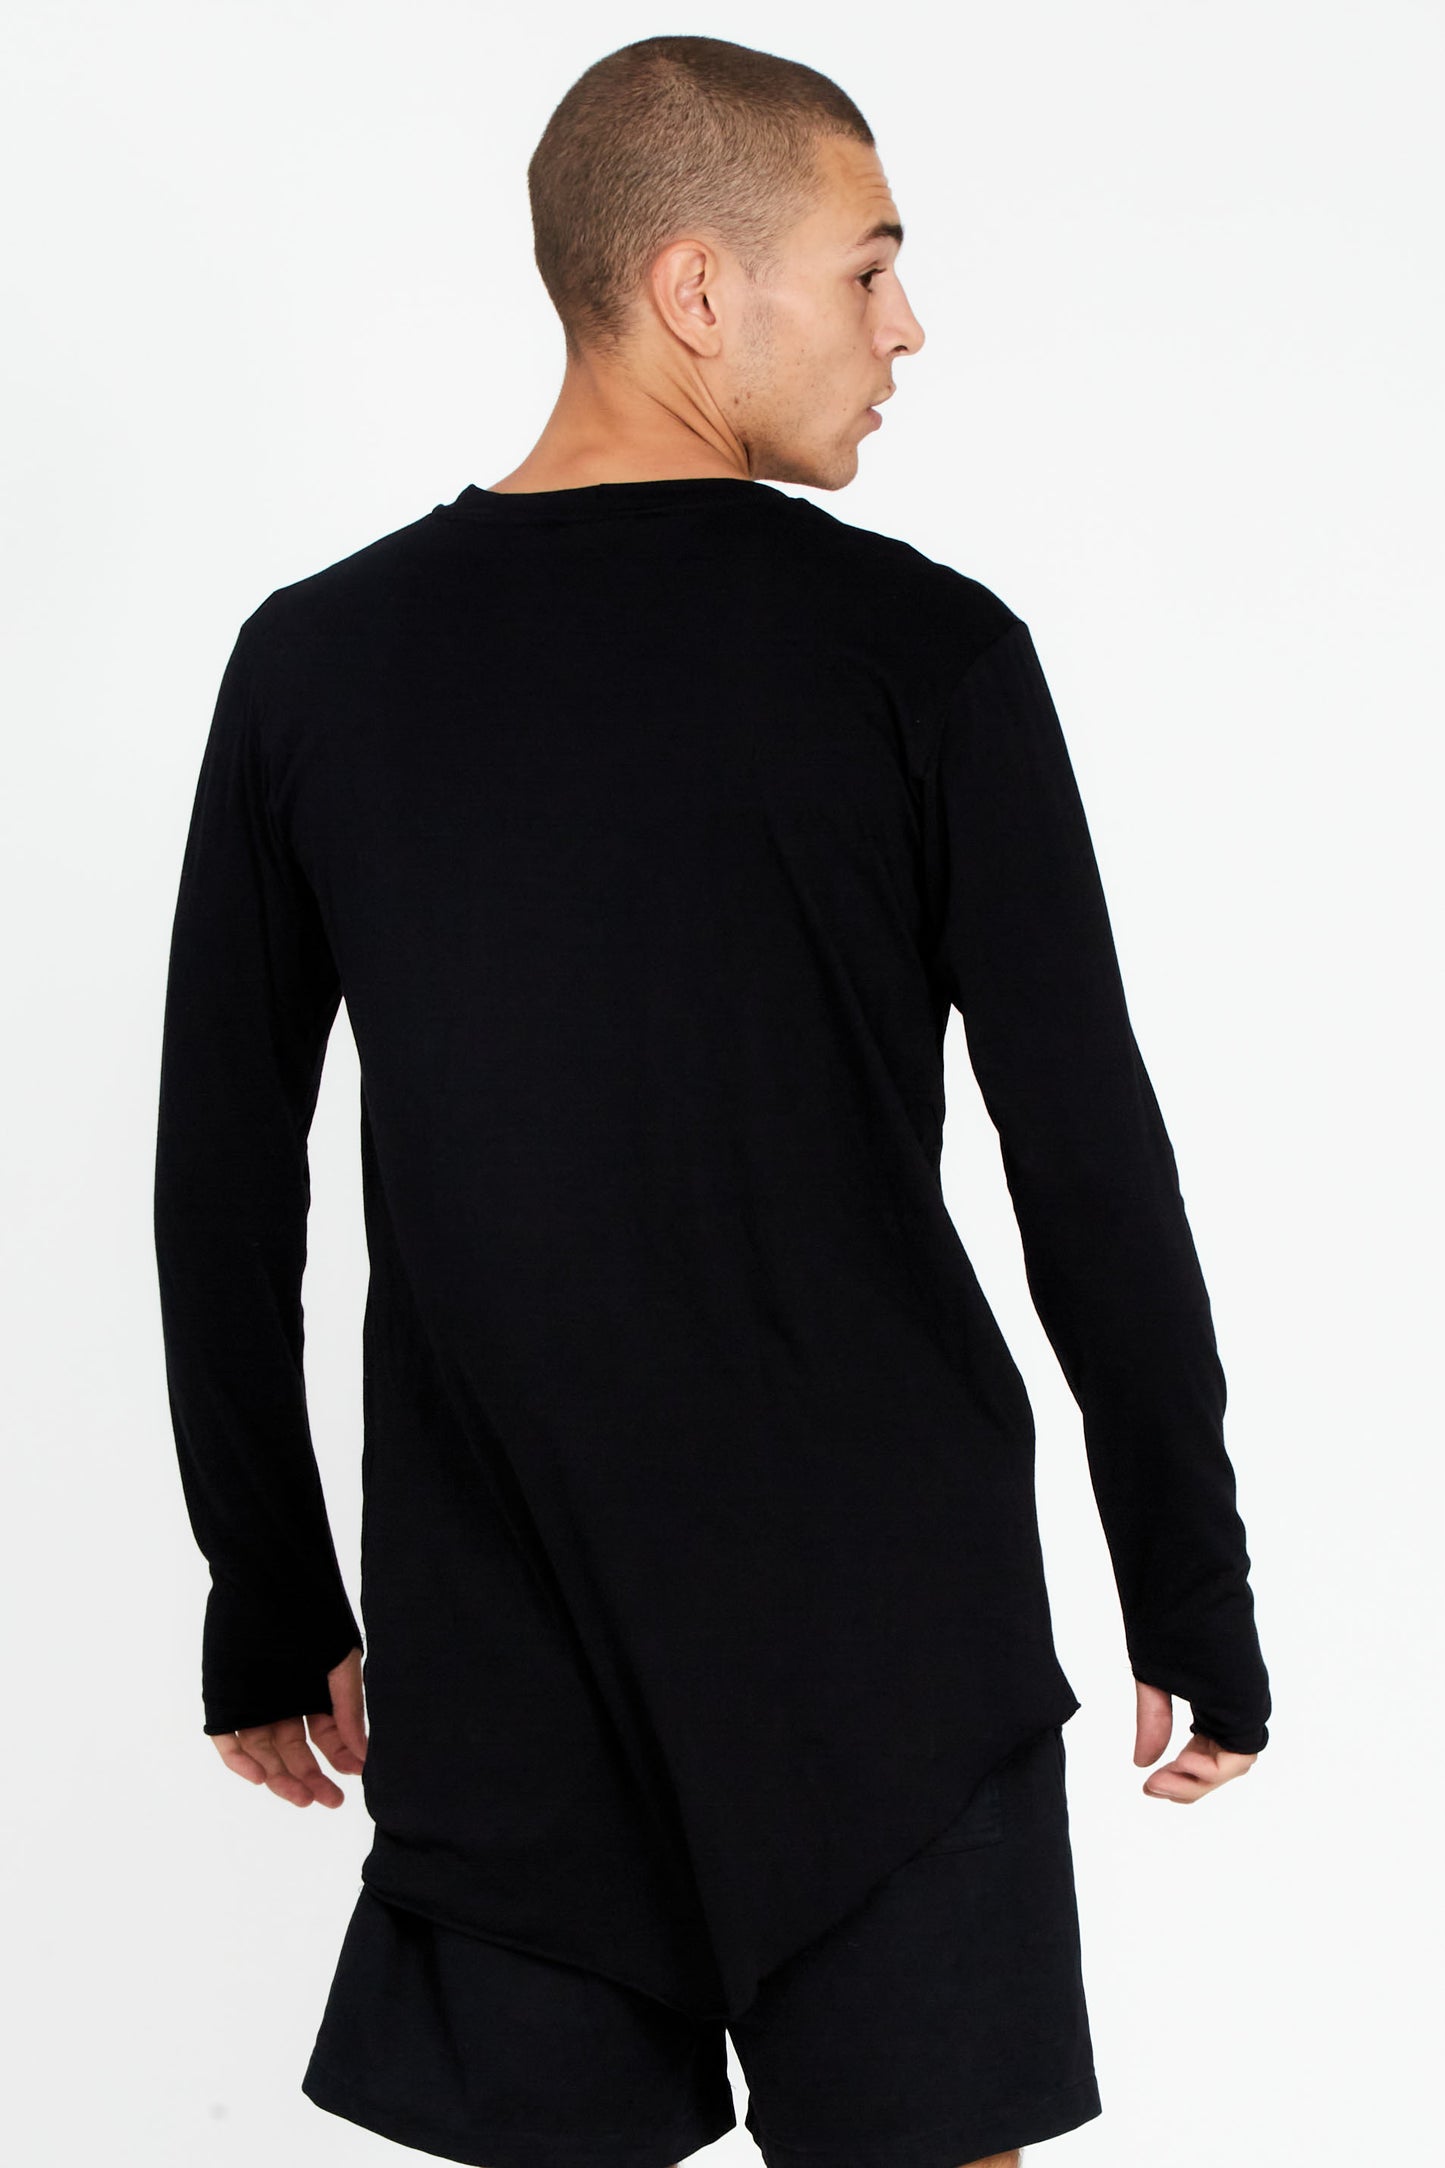 THE MATERIAL (LS) TOP